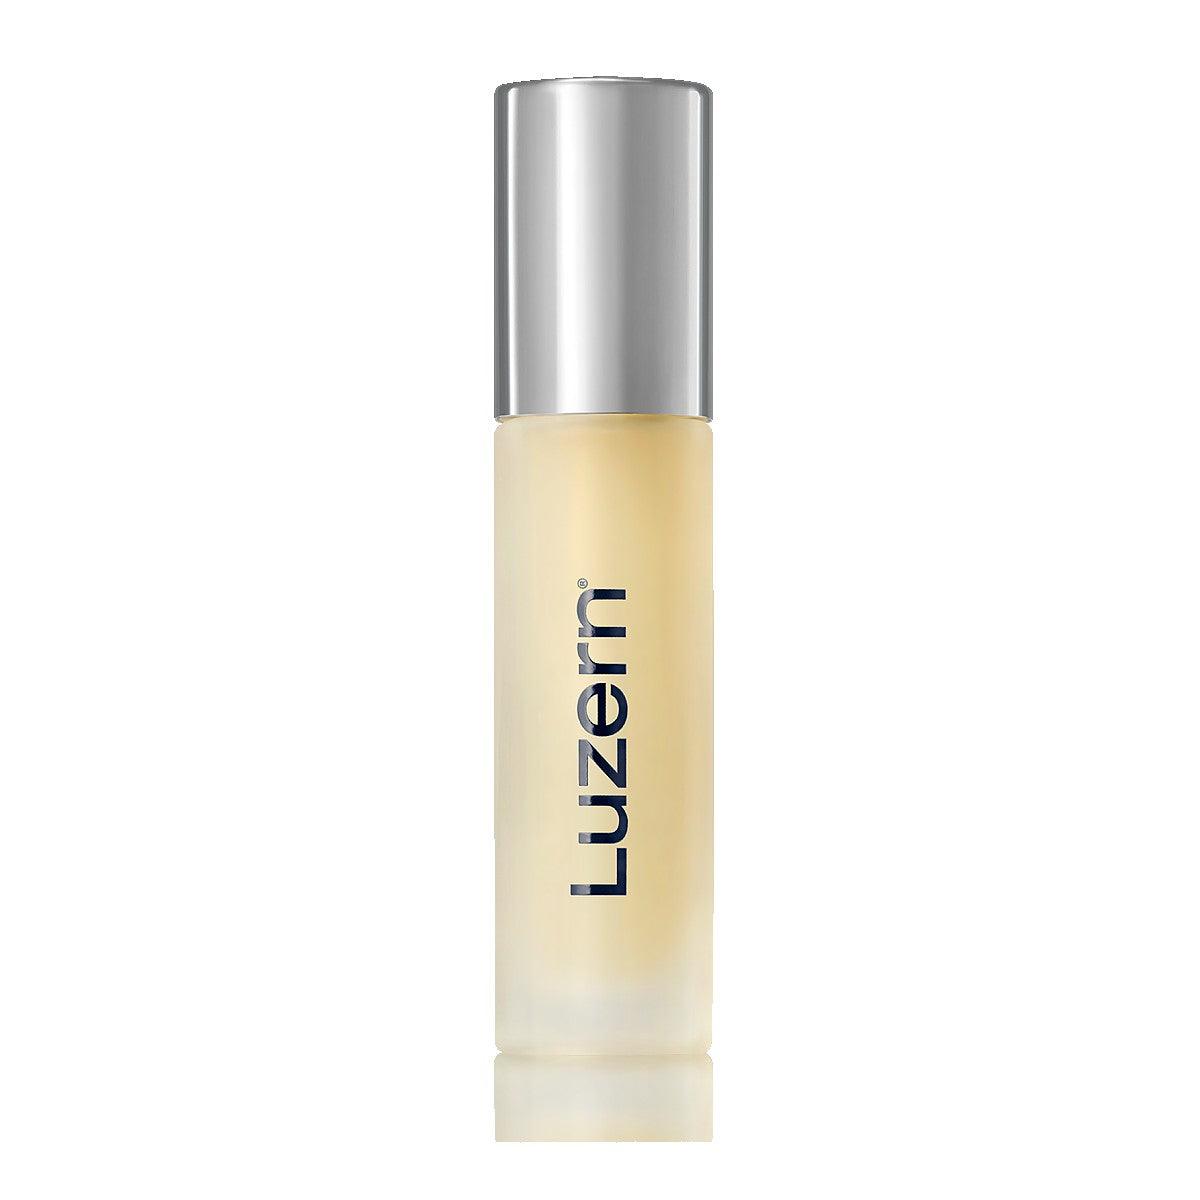 SERUM ABSOLUT RECOVERY Luzern Boutique Deauville